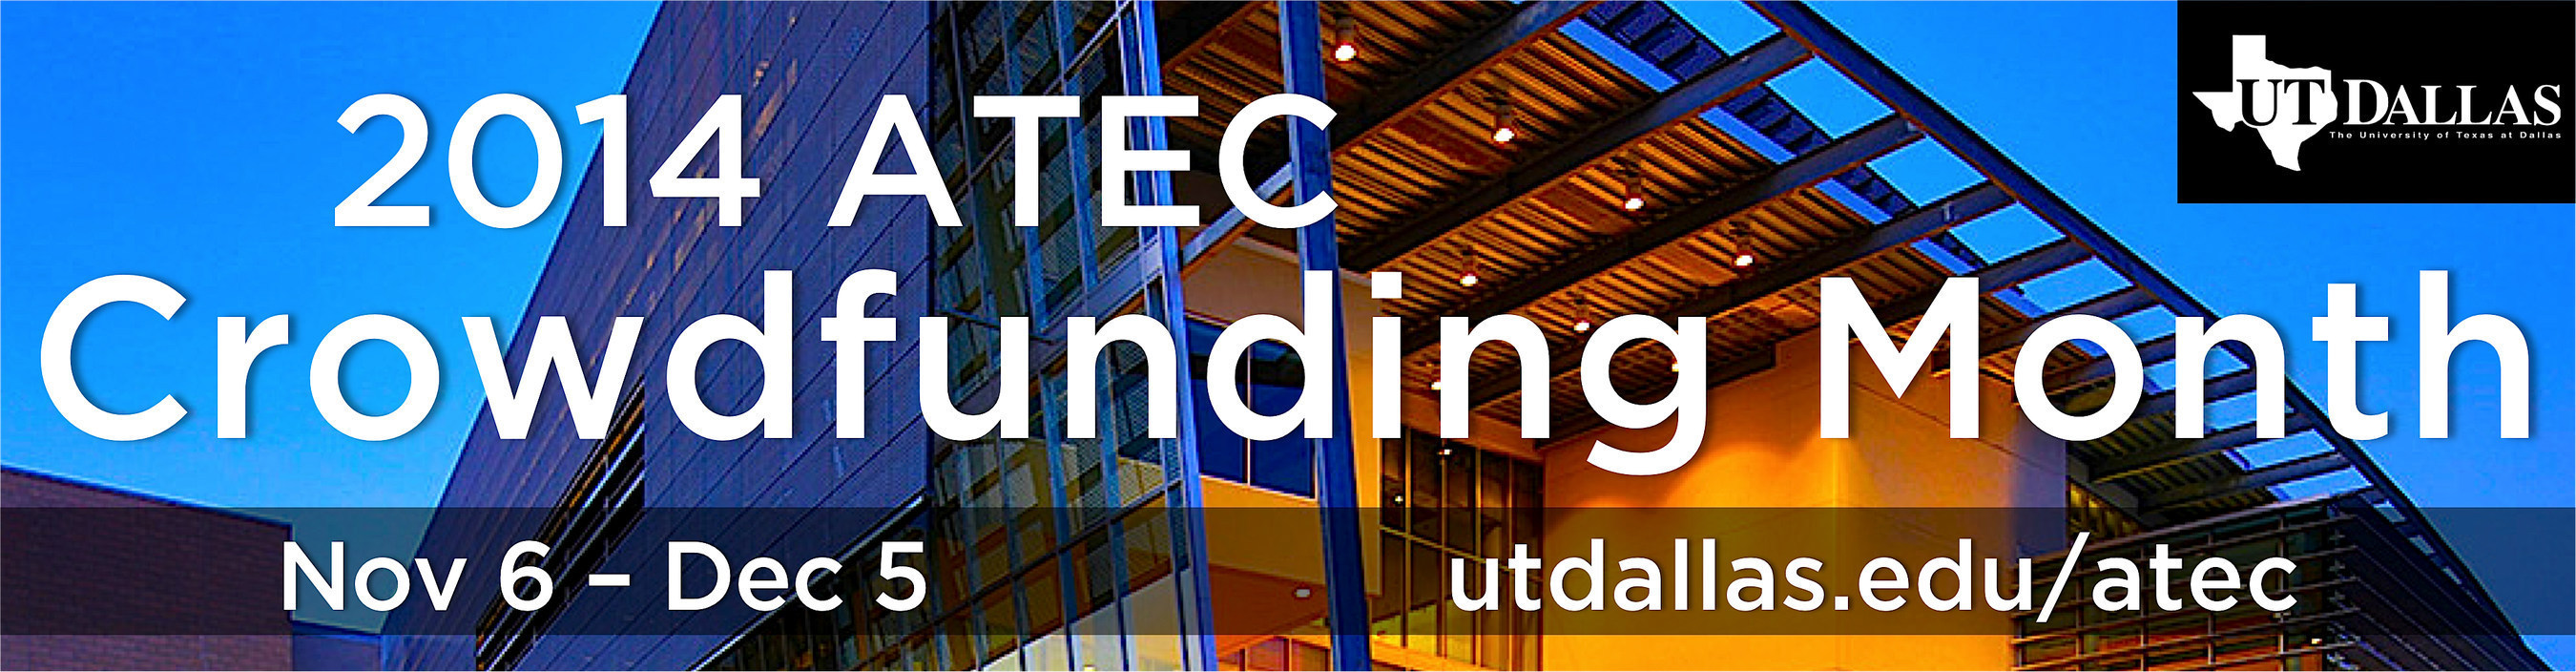 Innovative Crowdfunding Month Underway at University of Texas (Dallas)'s ATEC